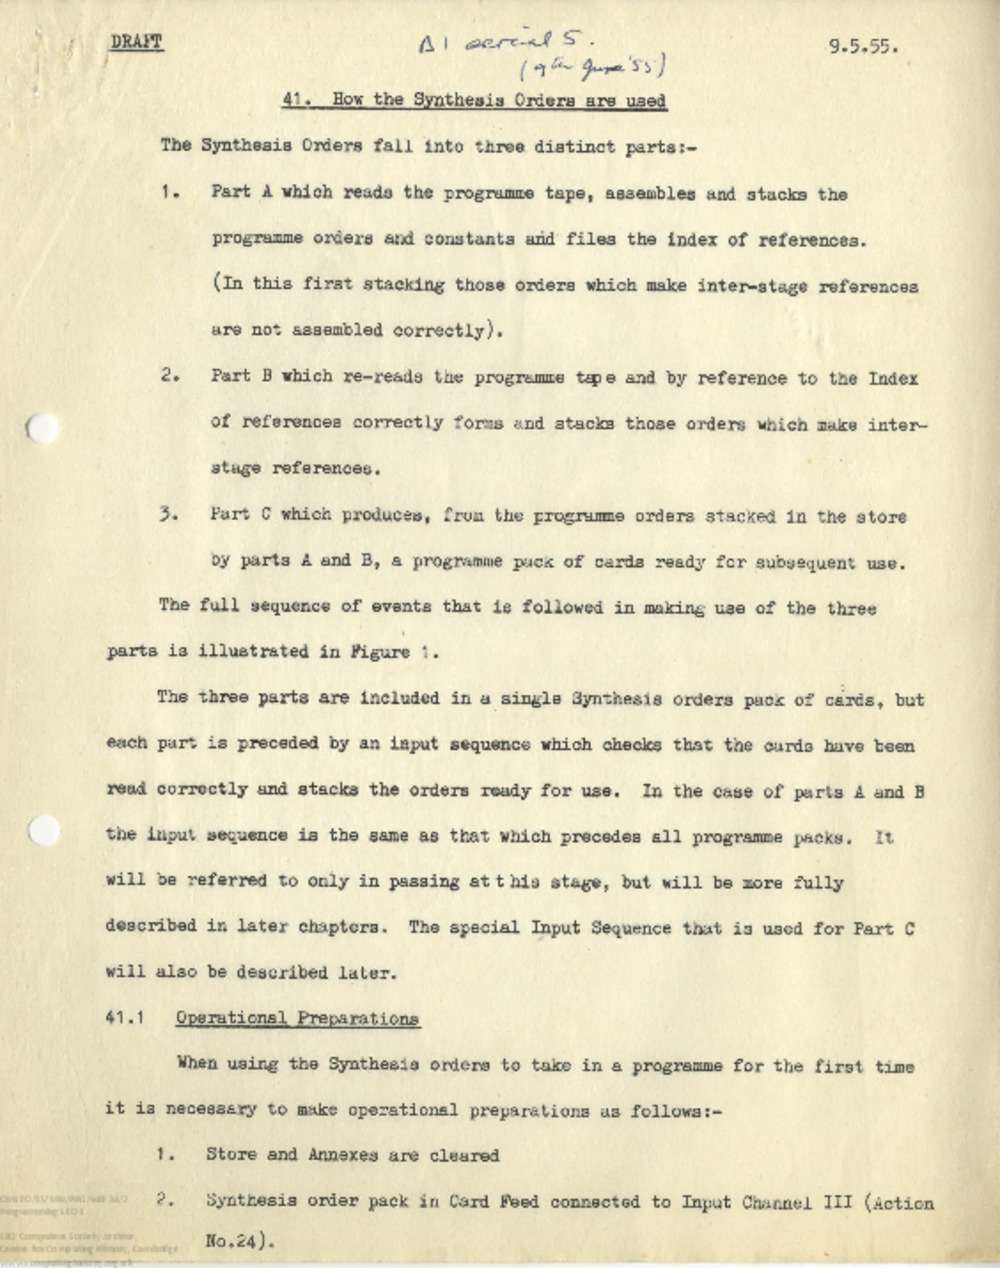 Article: 65265 Programming LEO I: Draft: 41. How the Synthesis Orders are Used, 9th May 1955